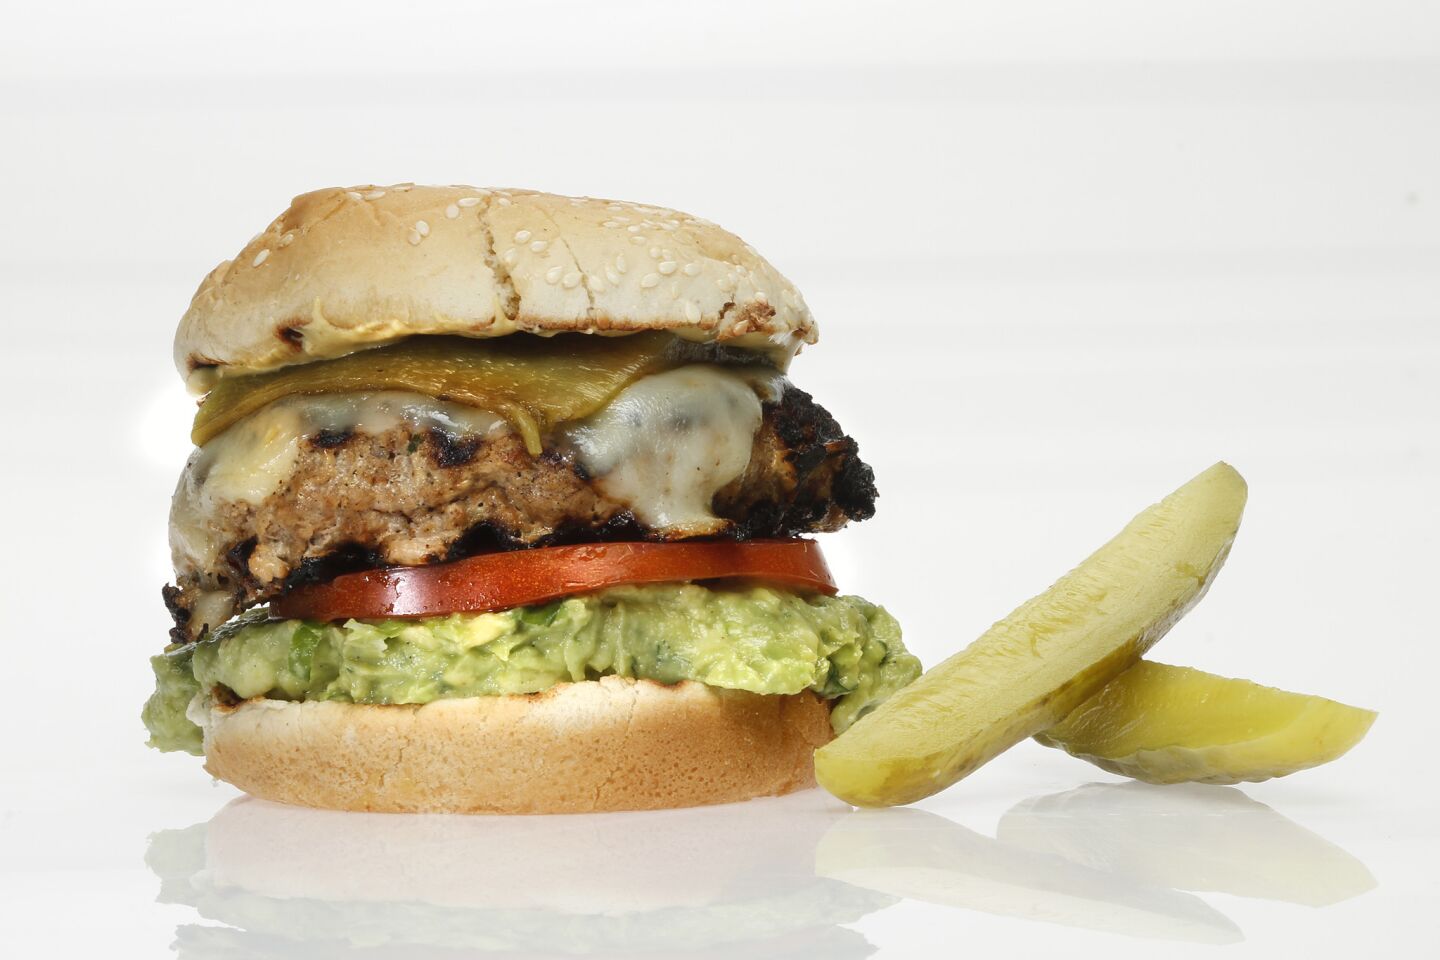 Is that guacamole? Yes it is! This turkey burger might convert the non-turkey-burger types.